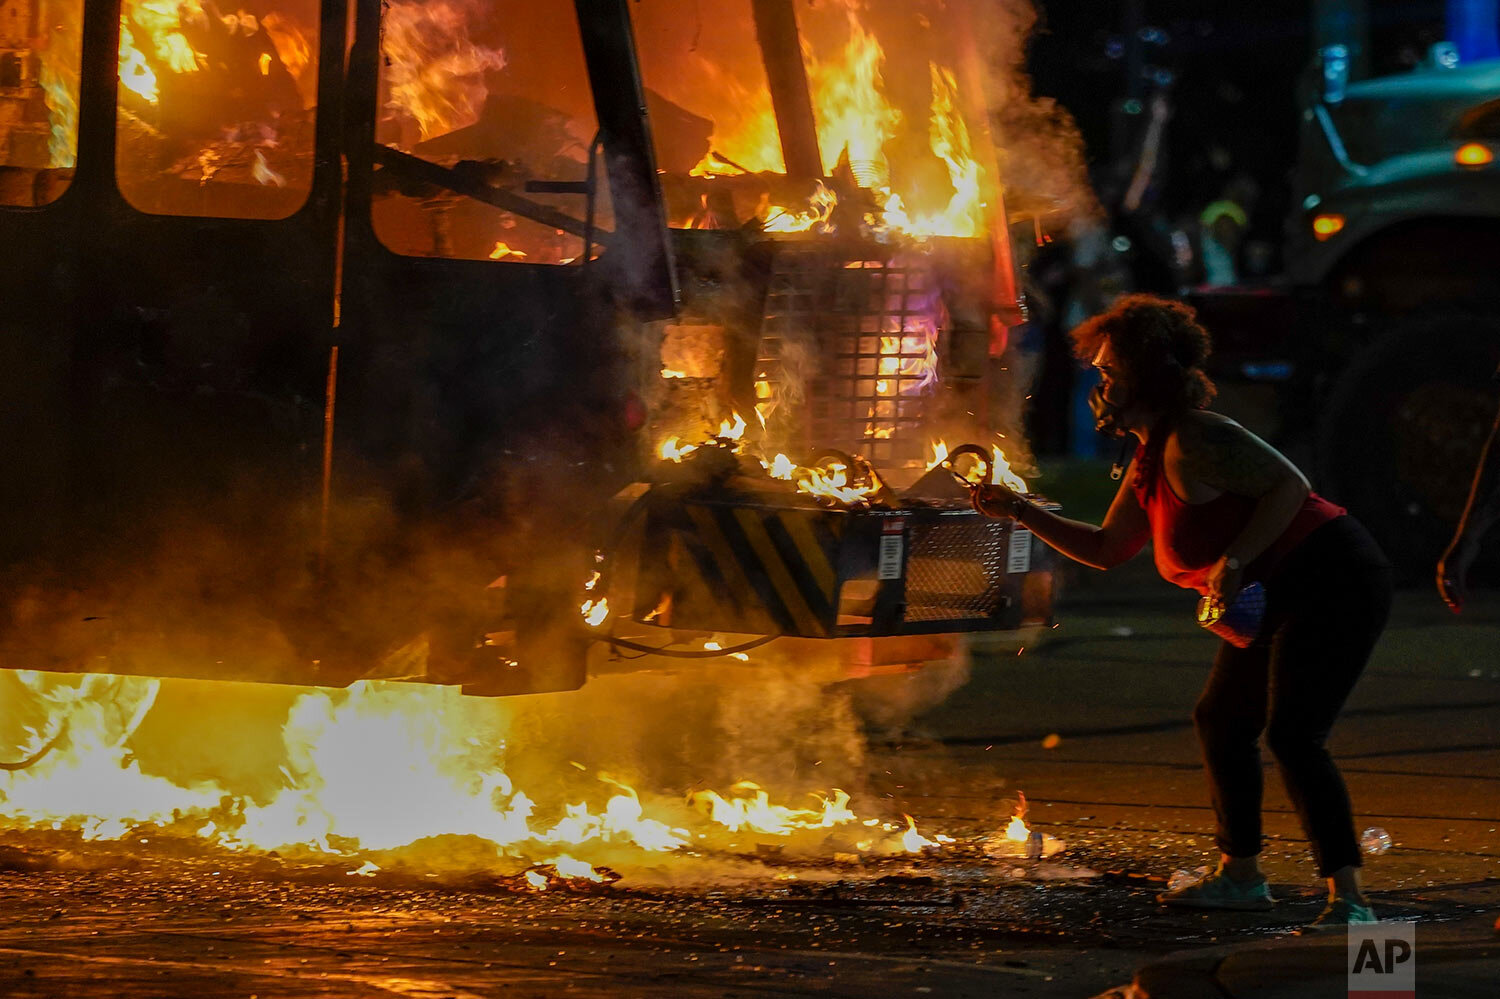  A protester lights a cigarette on a garbage truck that was set on fire during protests late Monday, Aug. 24, 2020, in Kenosha, Wis., sparked by the shooting of Jacob Blake by a Kenosha Police officer a day earlier. (AP Photo/Morry Gash) 